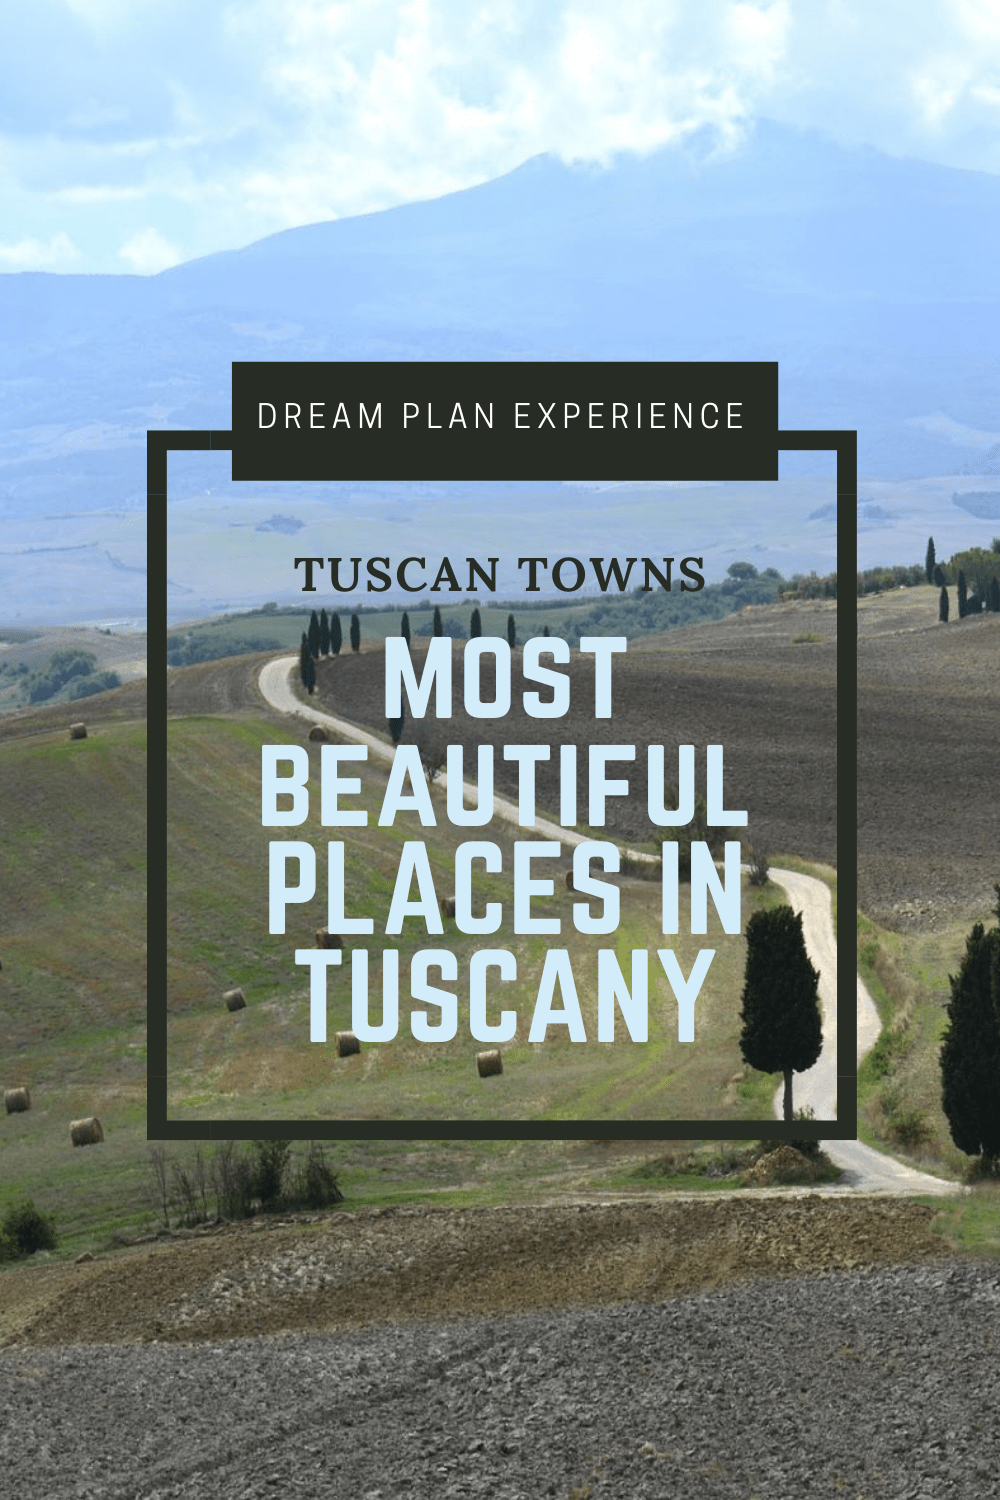 Some of the most beautiful places in Tuscany include the hilltop towns of Montalcino, Pienza, Montepulciano, Cortona, Arezzo and Siena.